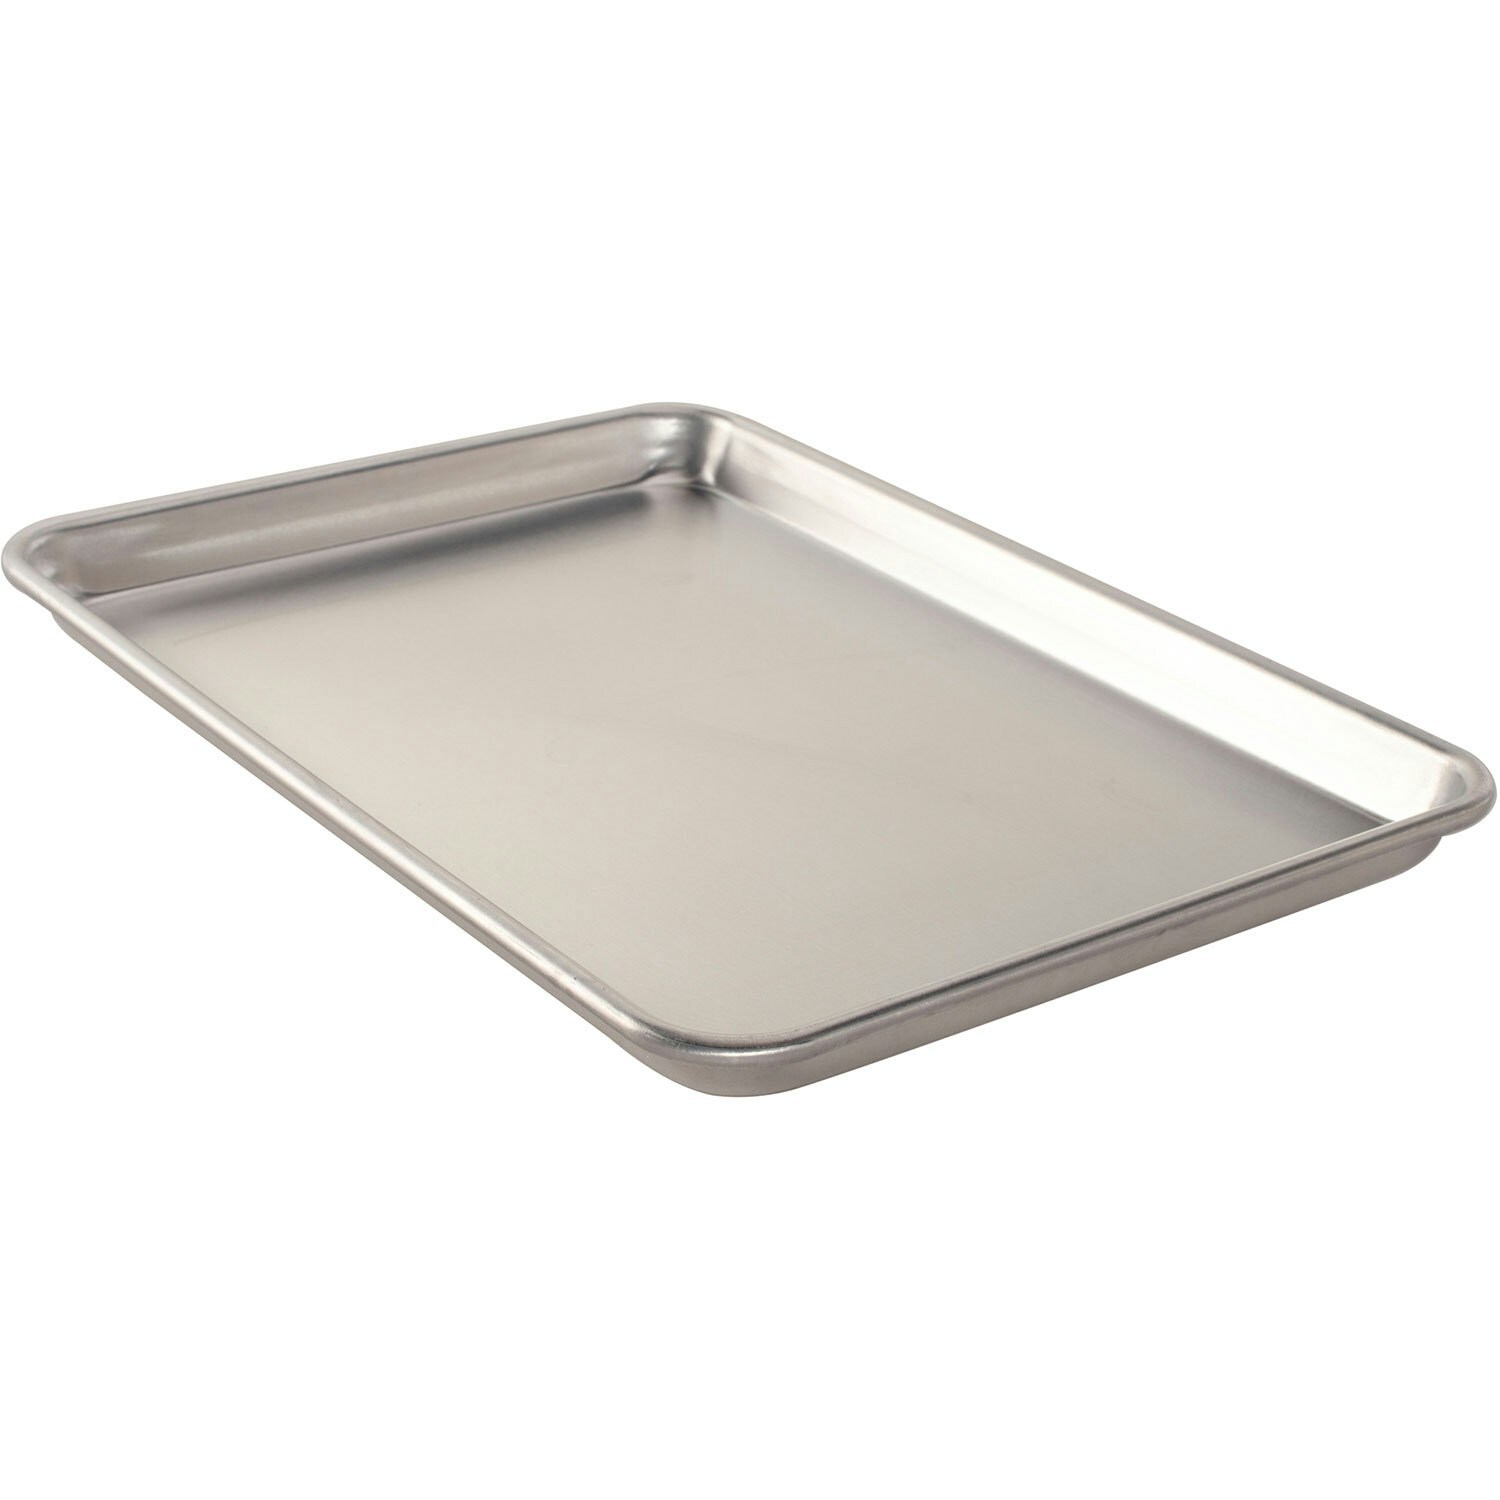 Nordic Ware Baking Sheet Prism 40 x 29 cm - jelly roll pan